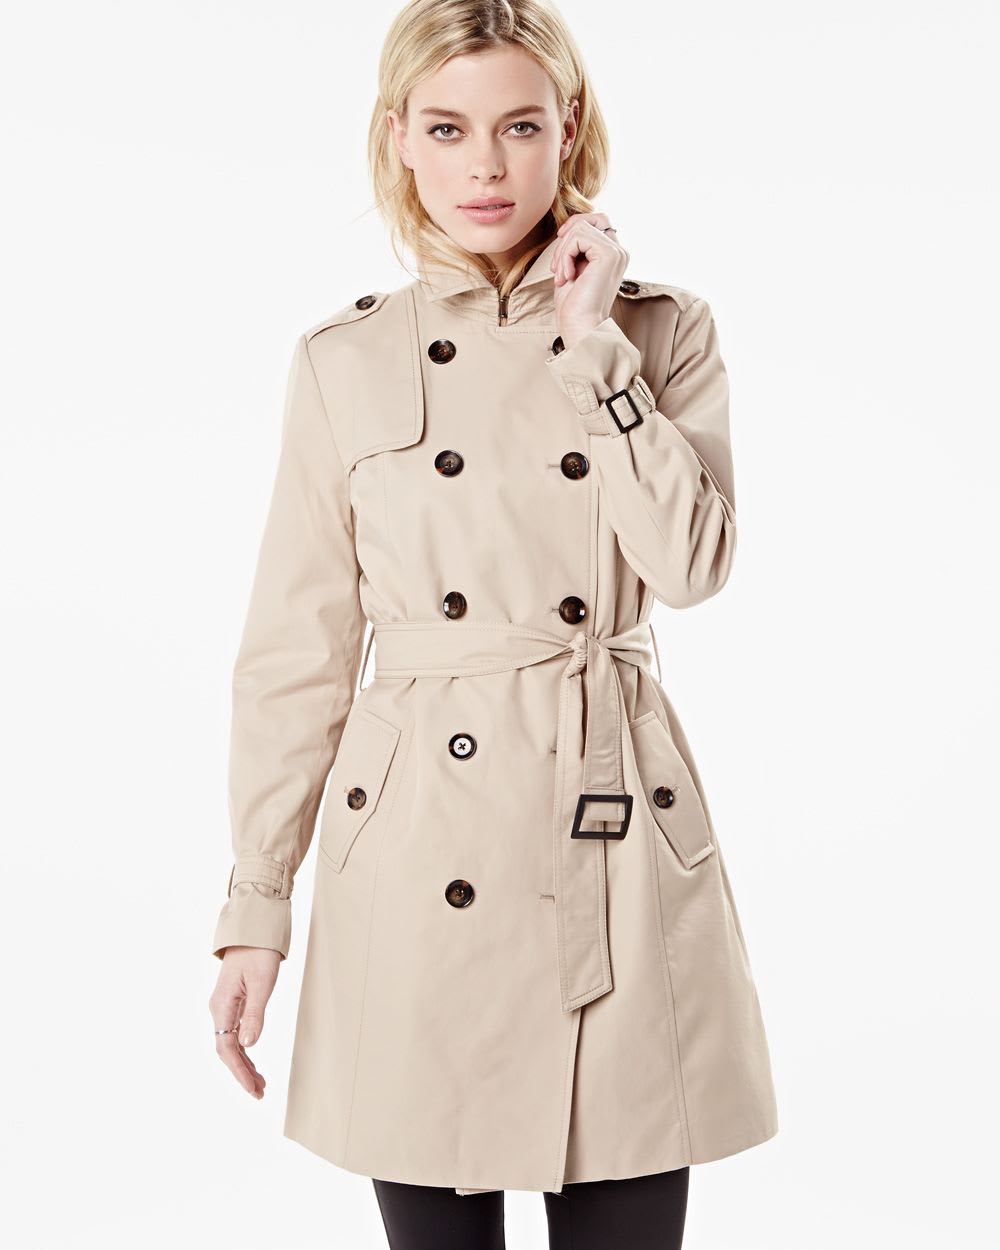 Double-breasted trench jacket | RW&CO.